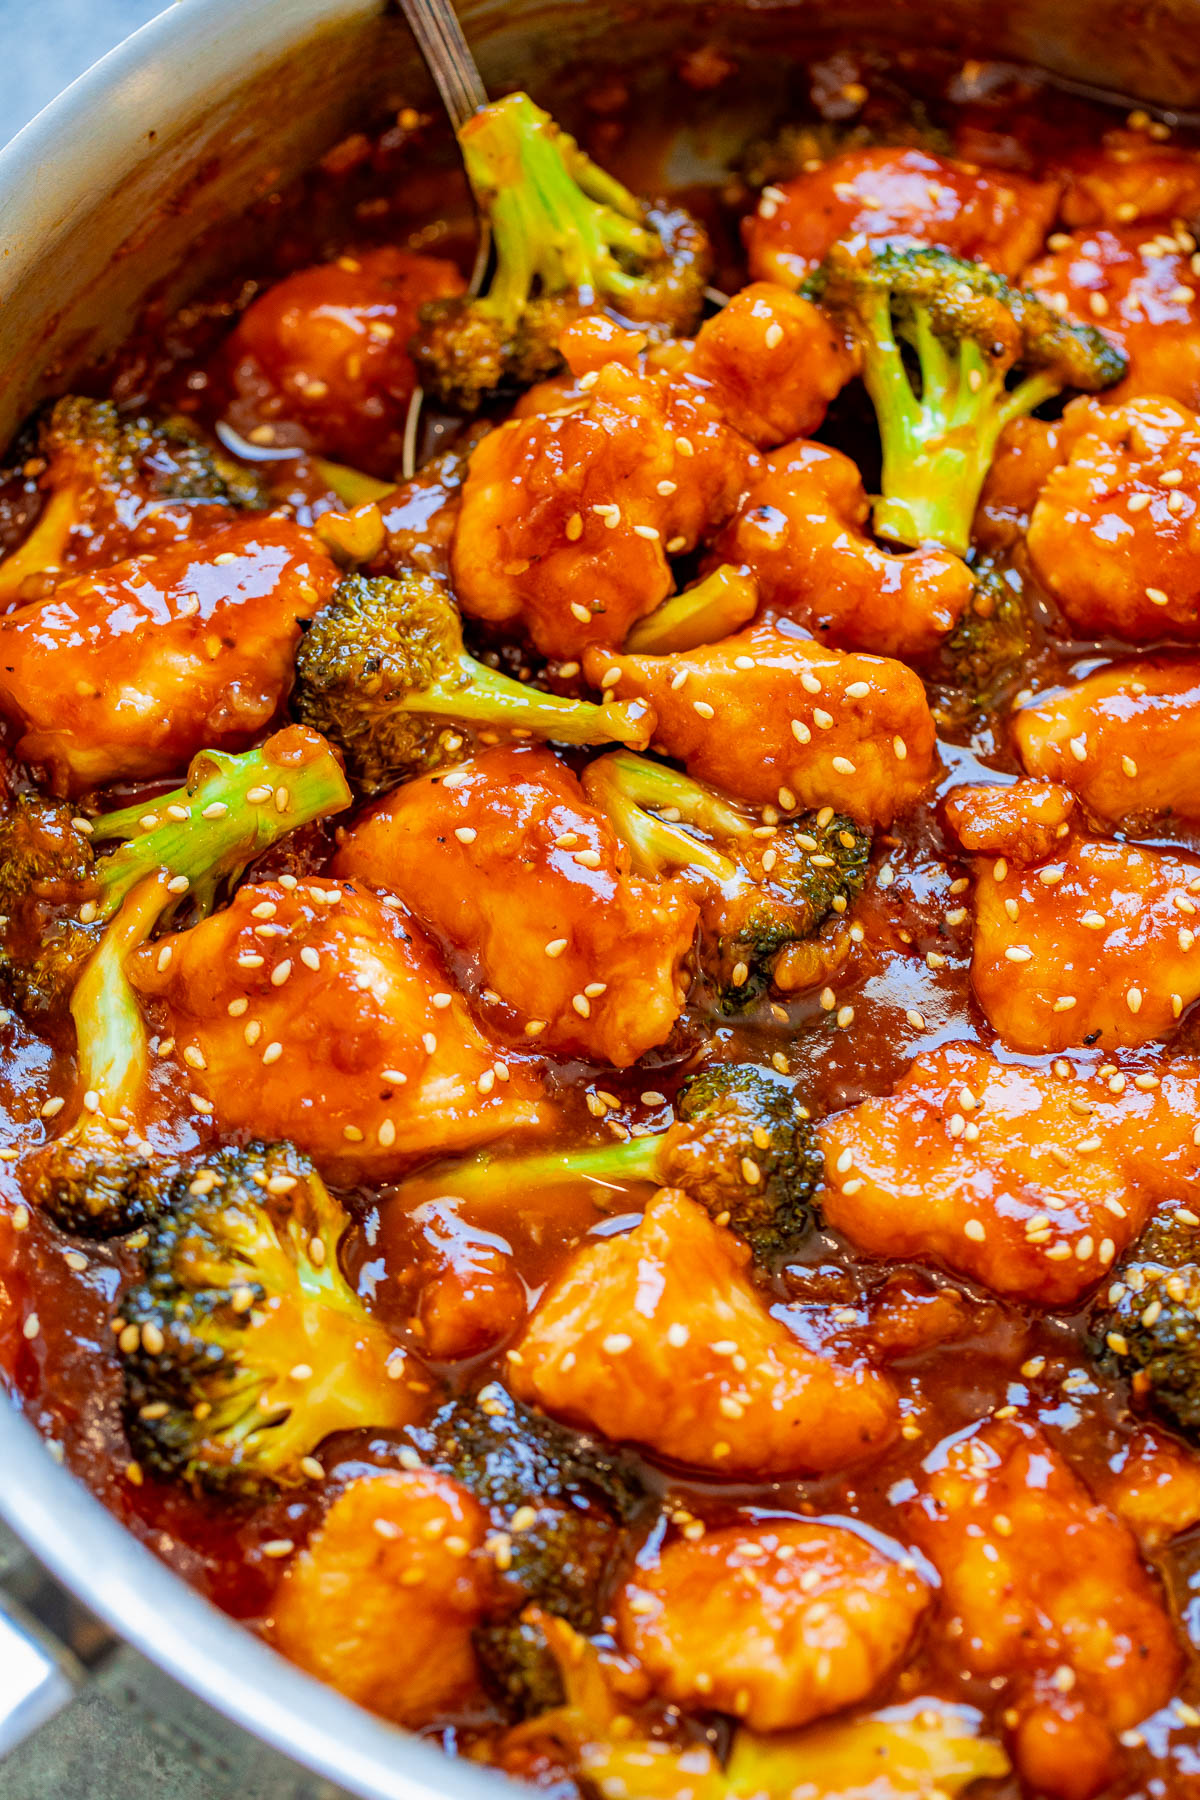 A pot of sesame sticky chicken and broccoli in a savory sauce.